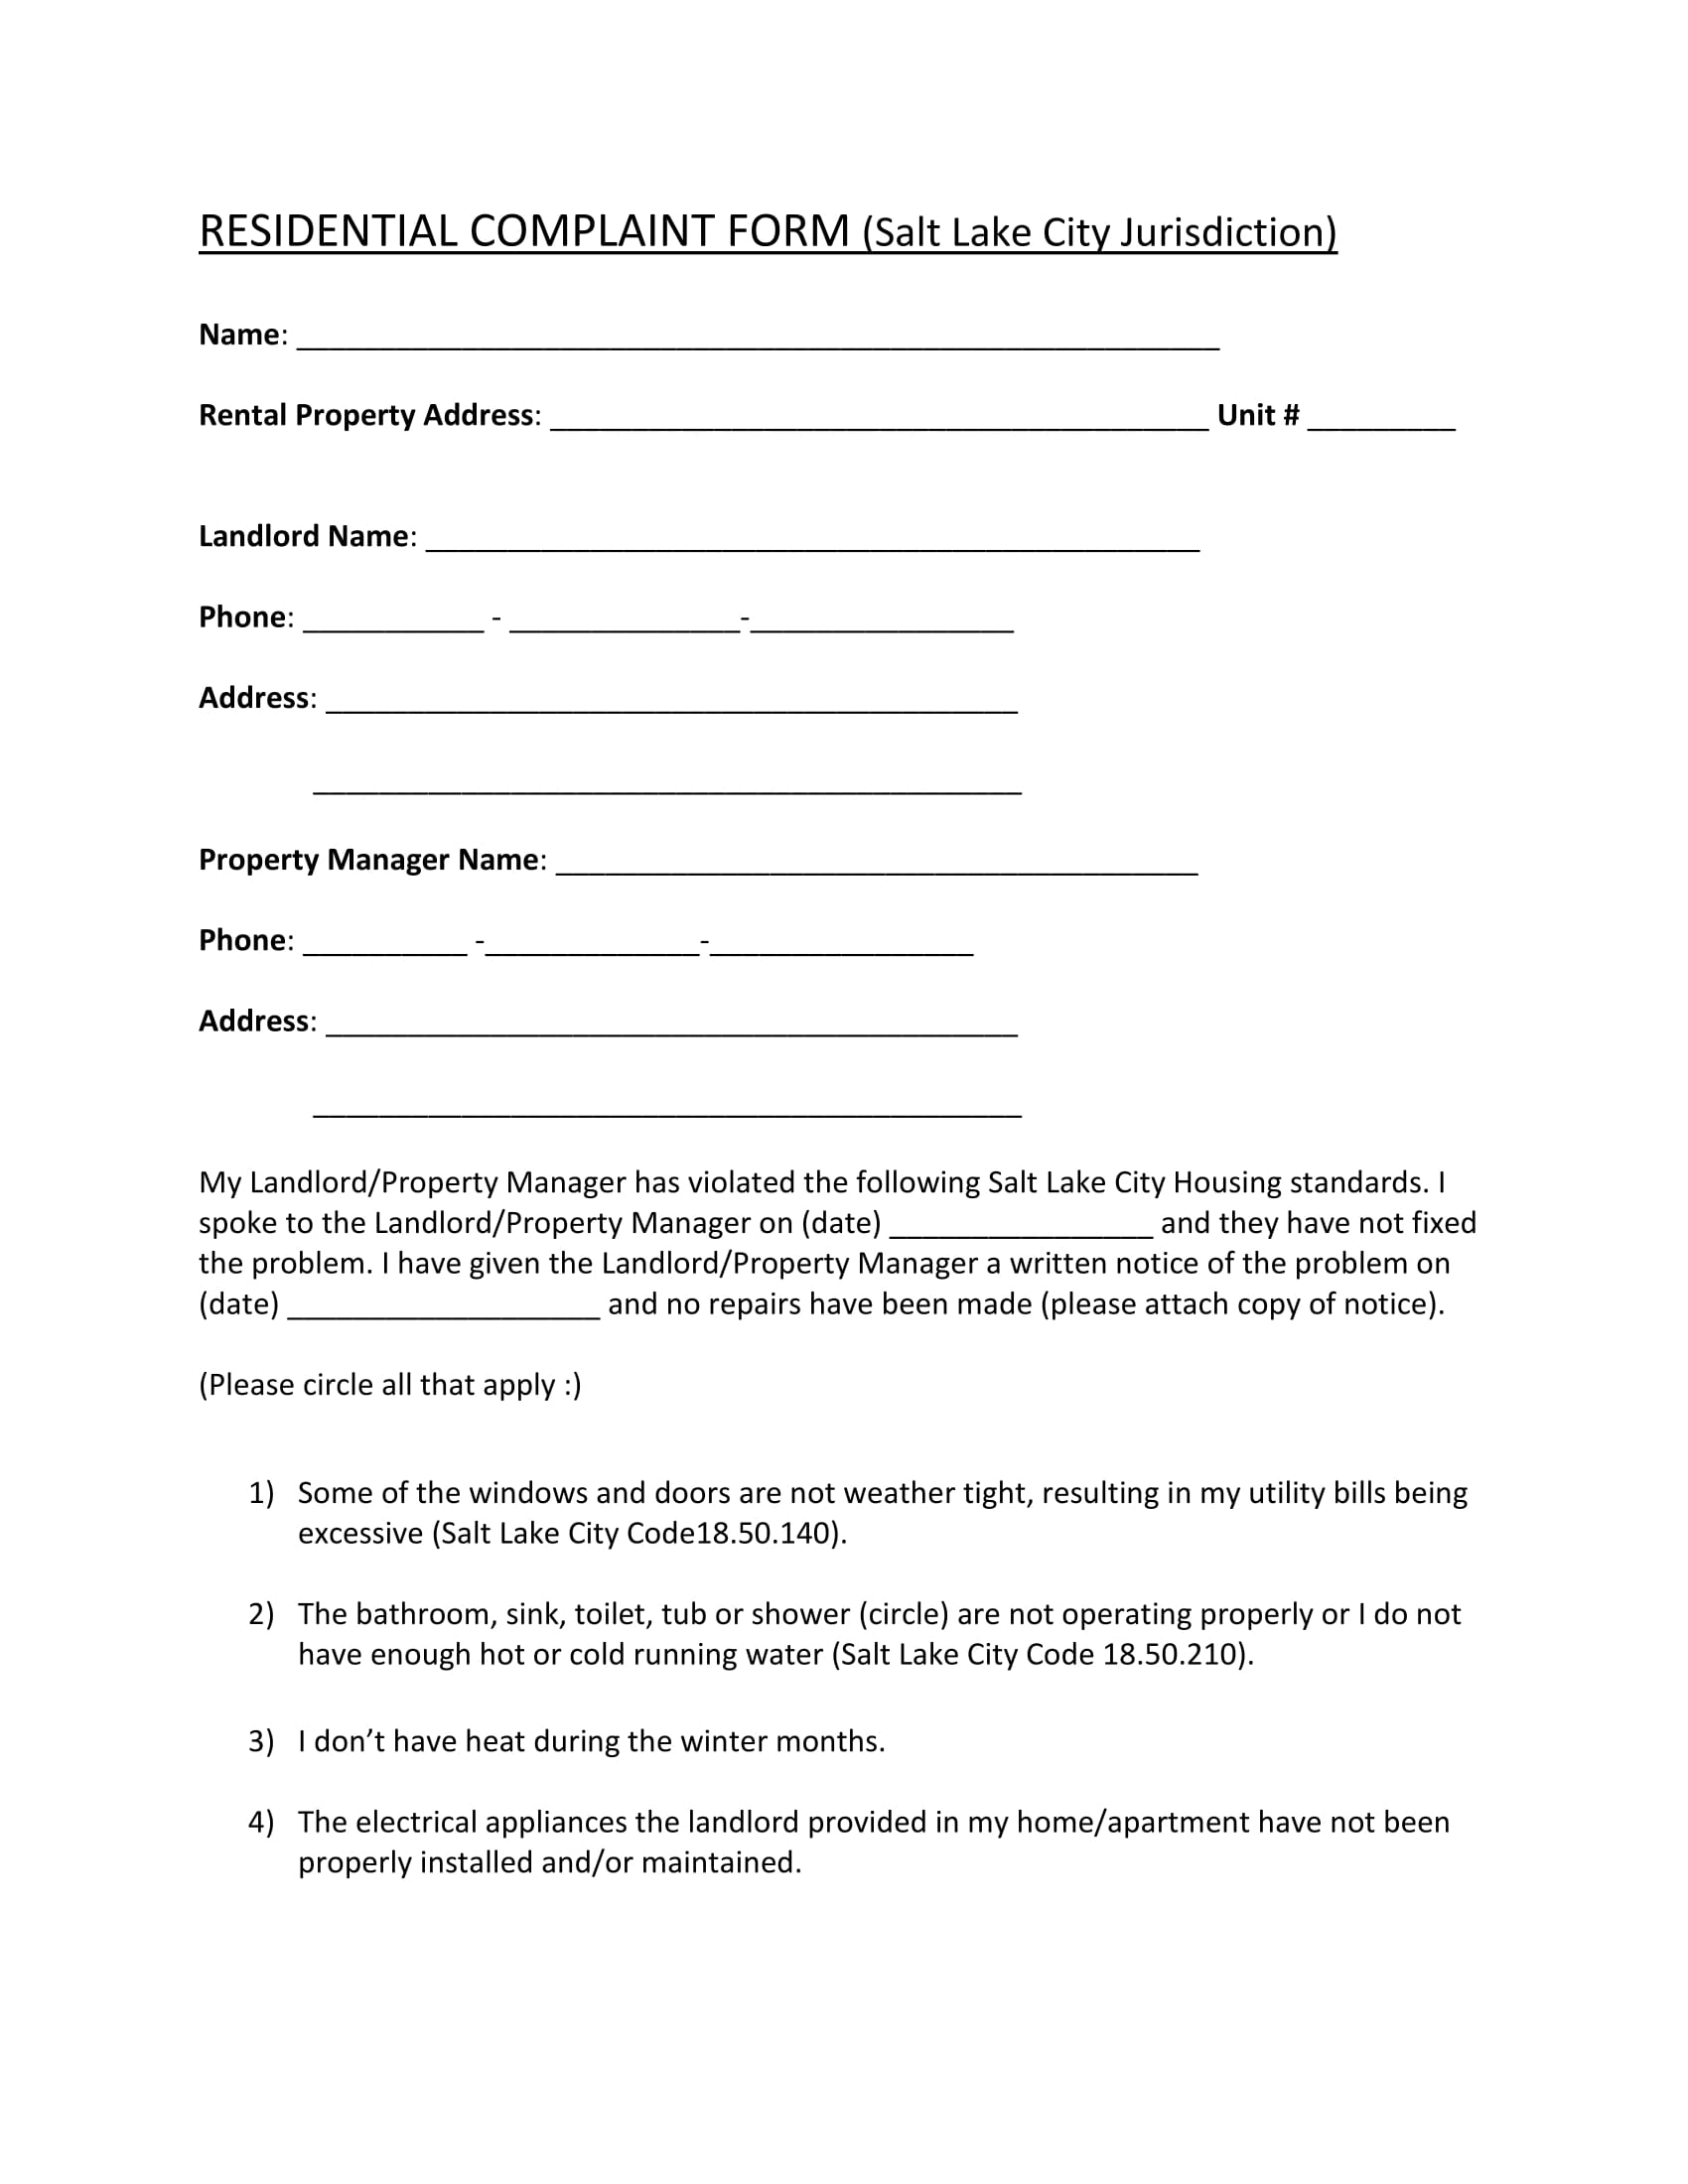 residential complaint form 1